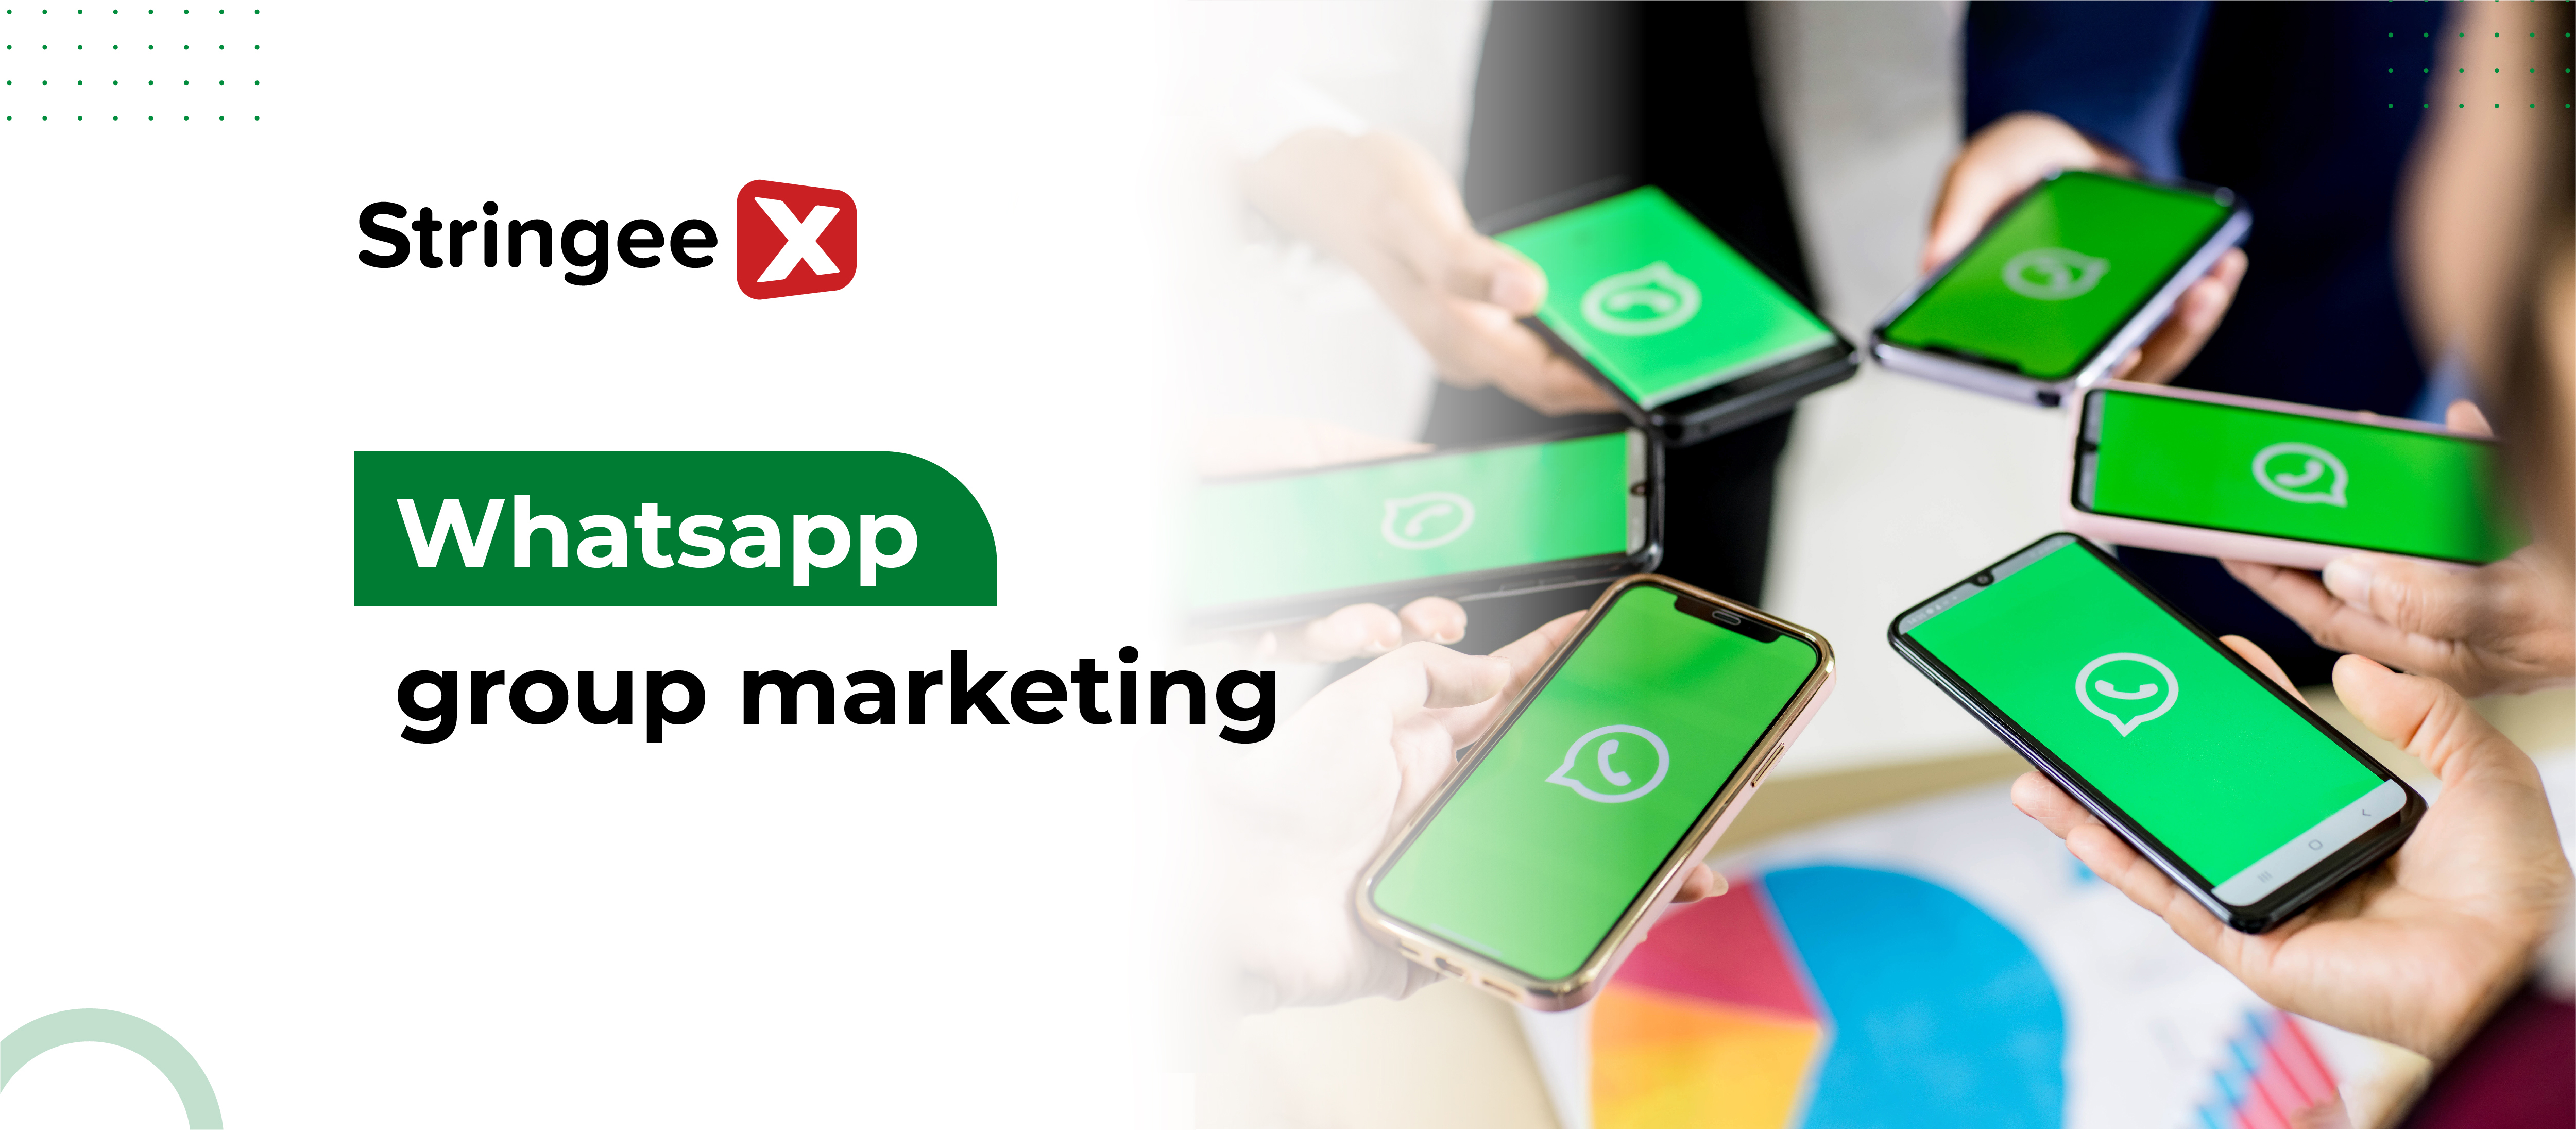 How To Use Whatsapp Group Marketing Effectively: A Walkthrough